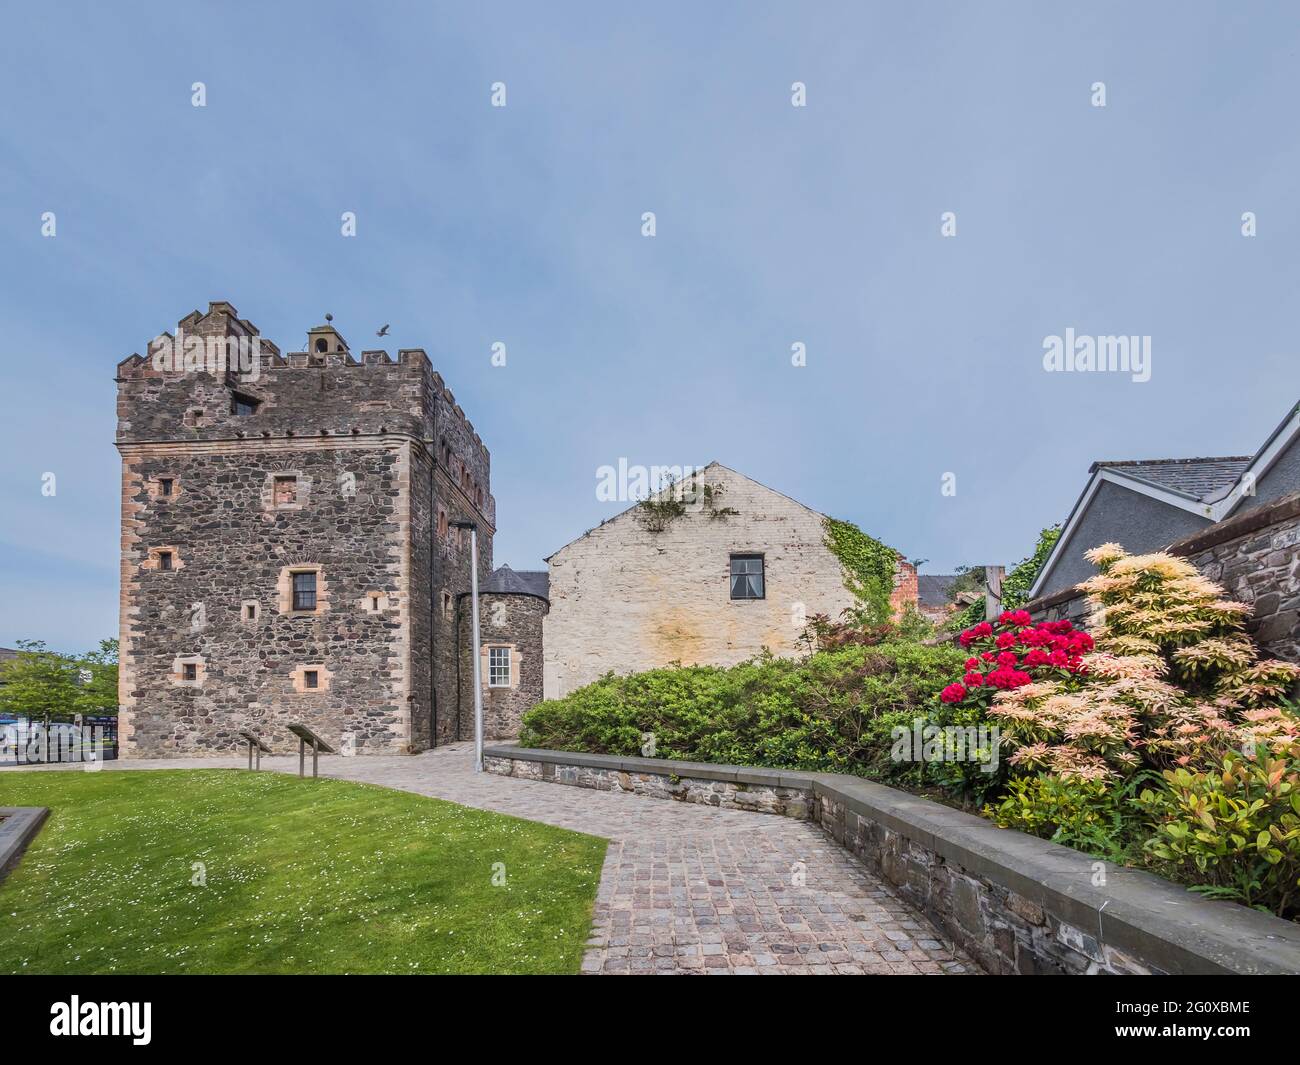 The image is of the medieval Castle-Keep Tower in the town centre of the west coast town and port of Stranraer on the west coast of Scotland Stock Photo